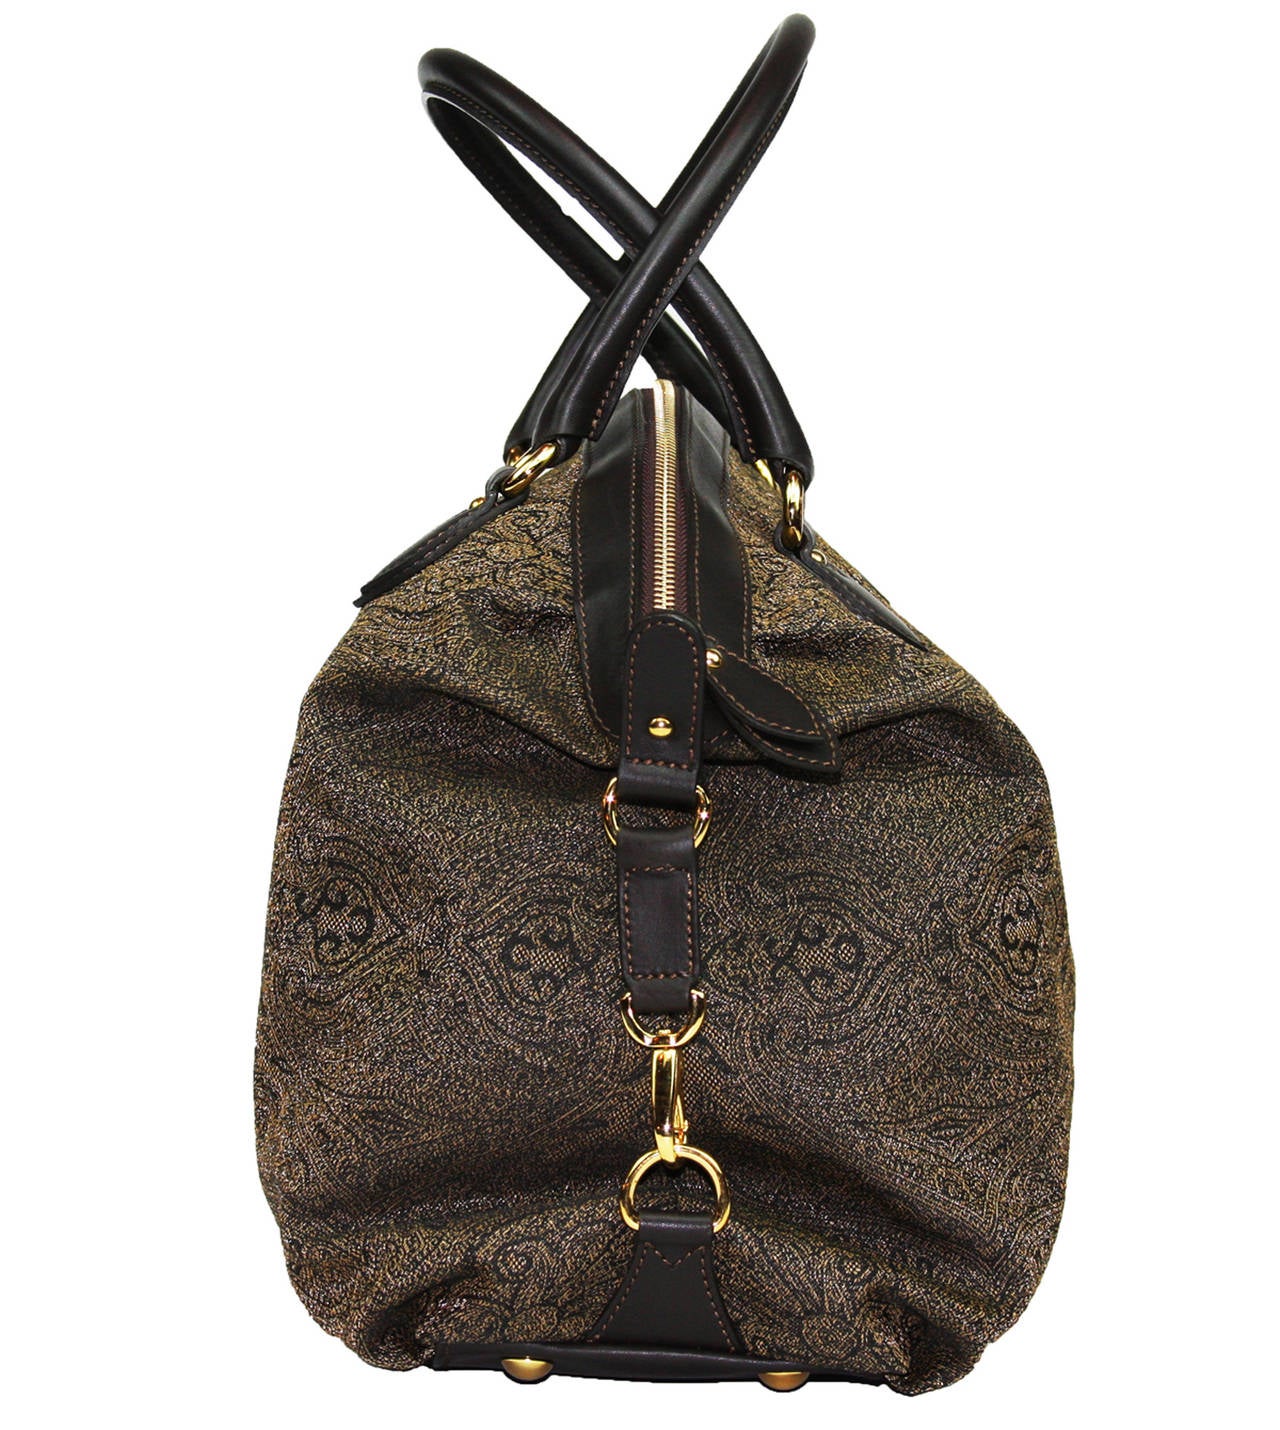 NEW ETRO PAISLEY PRINT BAG
COLORS – BLACK & BROWN/GREEN
OUTSIDE COMPOSITION: 55% POLYAMIDE, 45% POLYESTER – DOUBLED 100% COTTON
LINING COMPOSITION: 100% POLYESTER

ZIPPER CLOSURE
GOLD METAL HARDWARE
METAL FEET ON BASE OF BAG
ONE INTERNAL ZIP